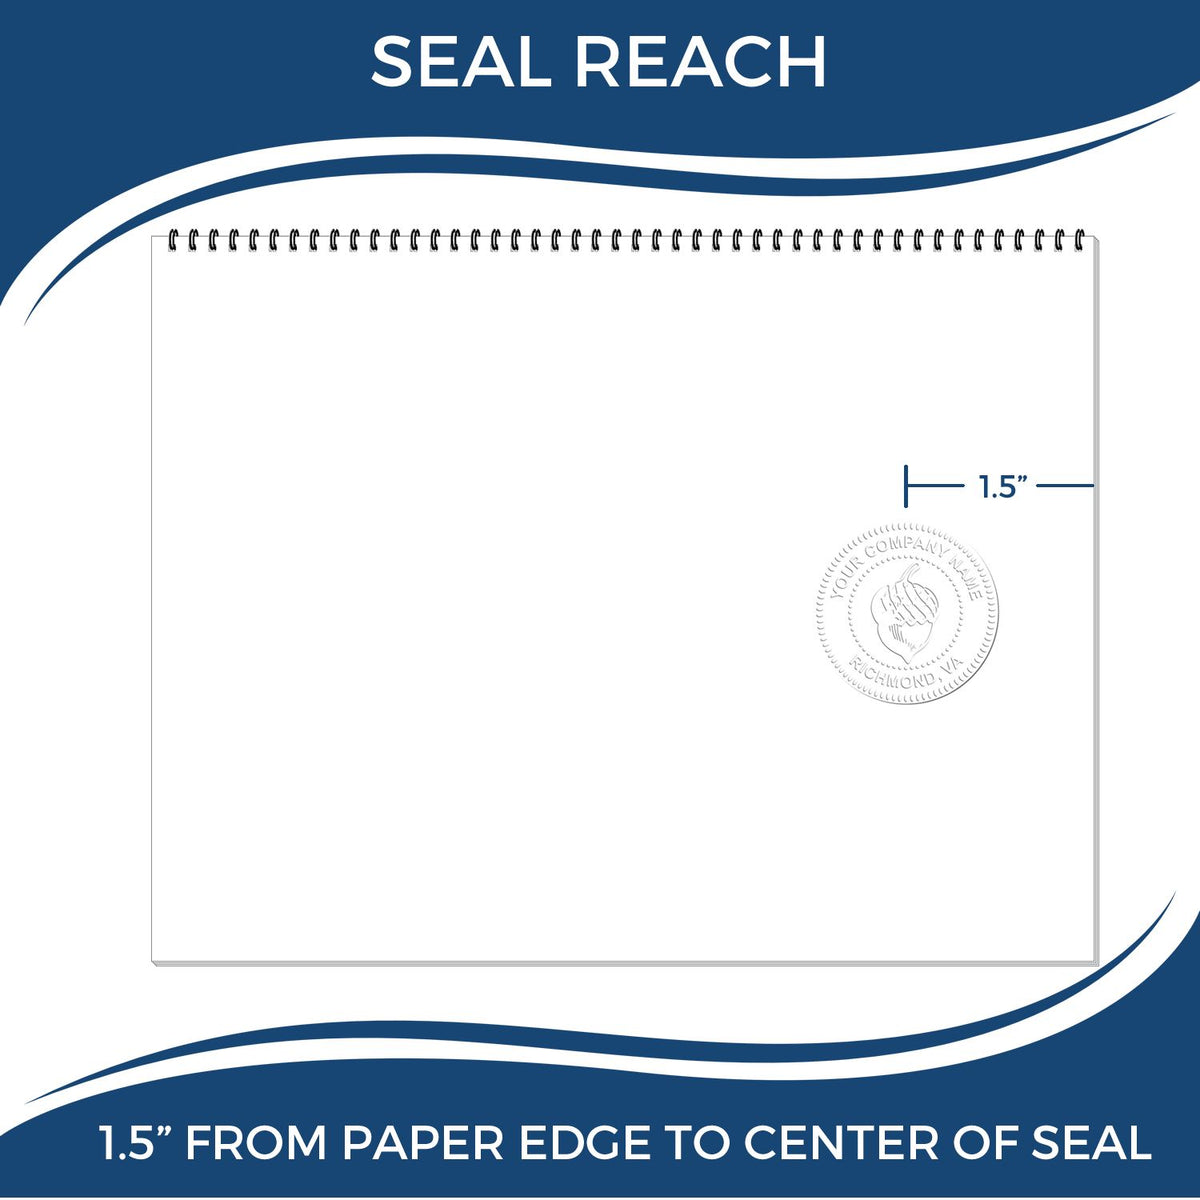 An infographic showing the seal reach which is represented by a ruler and a miniature seal image of the Soft South Carolina Professional Engineer Seal